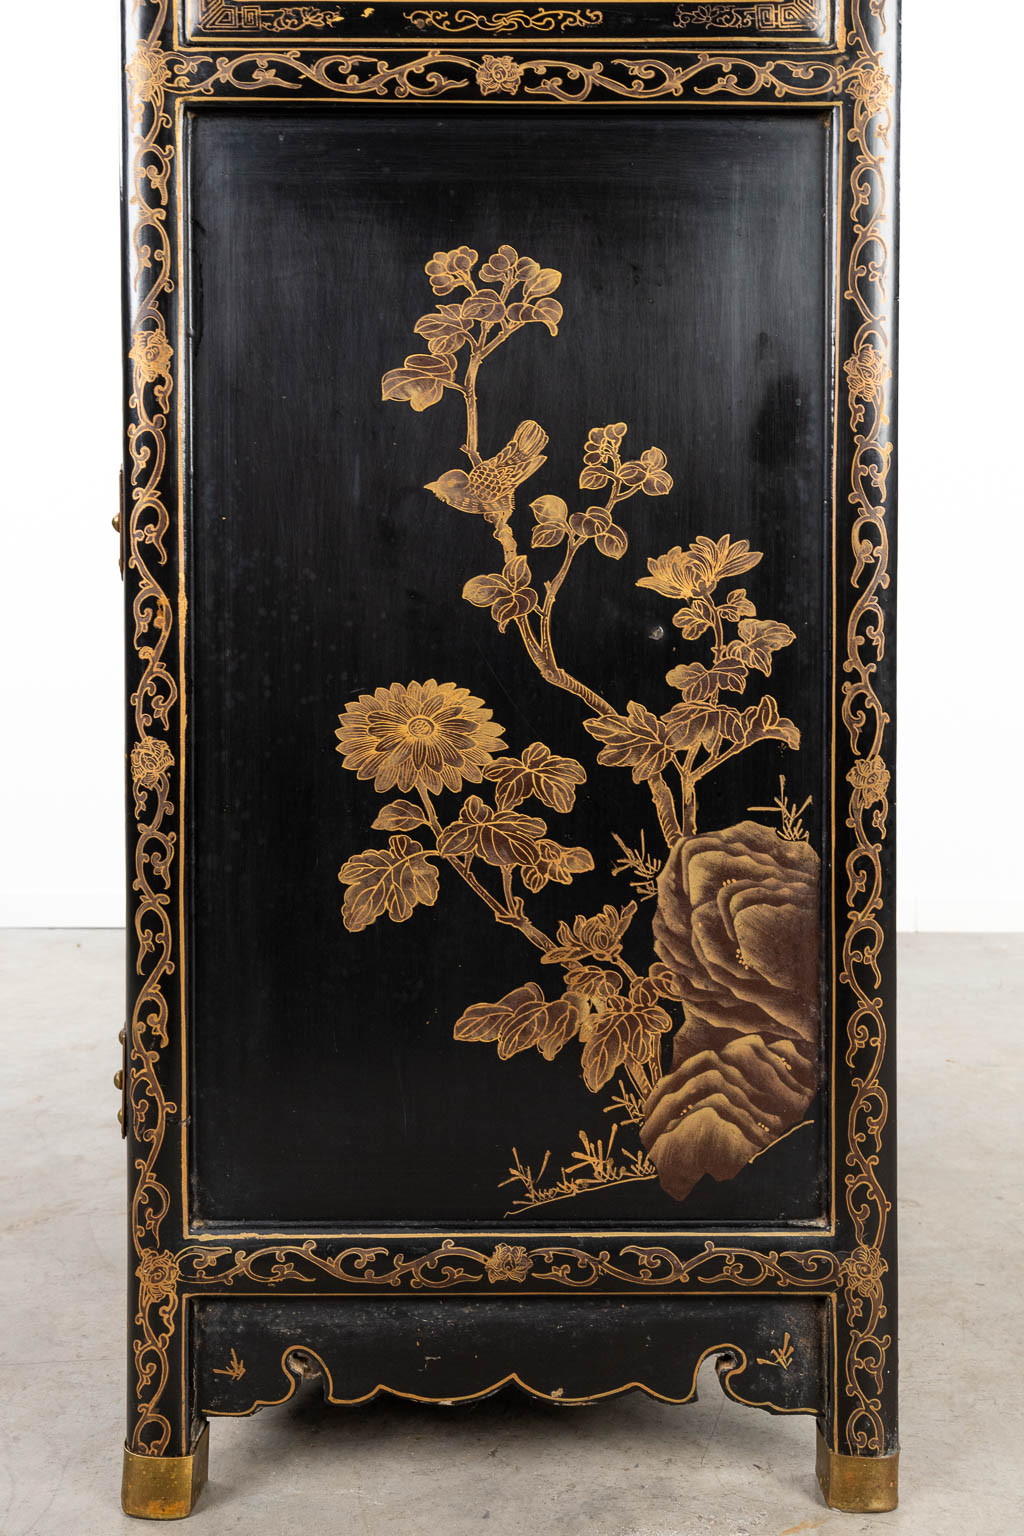 A Chinese display cabinet in Oriental style and finished with hardstone. (H:148cm)